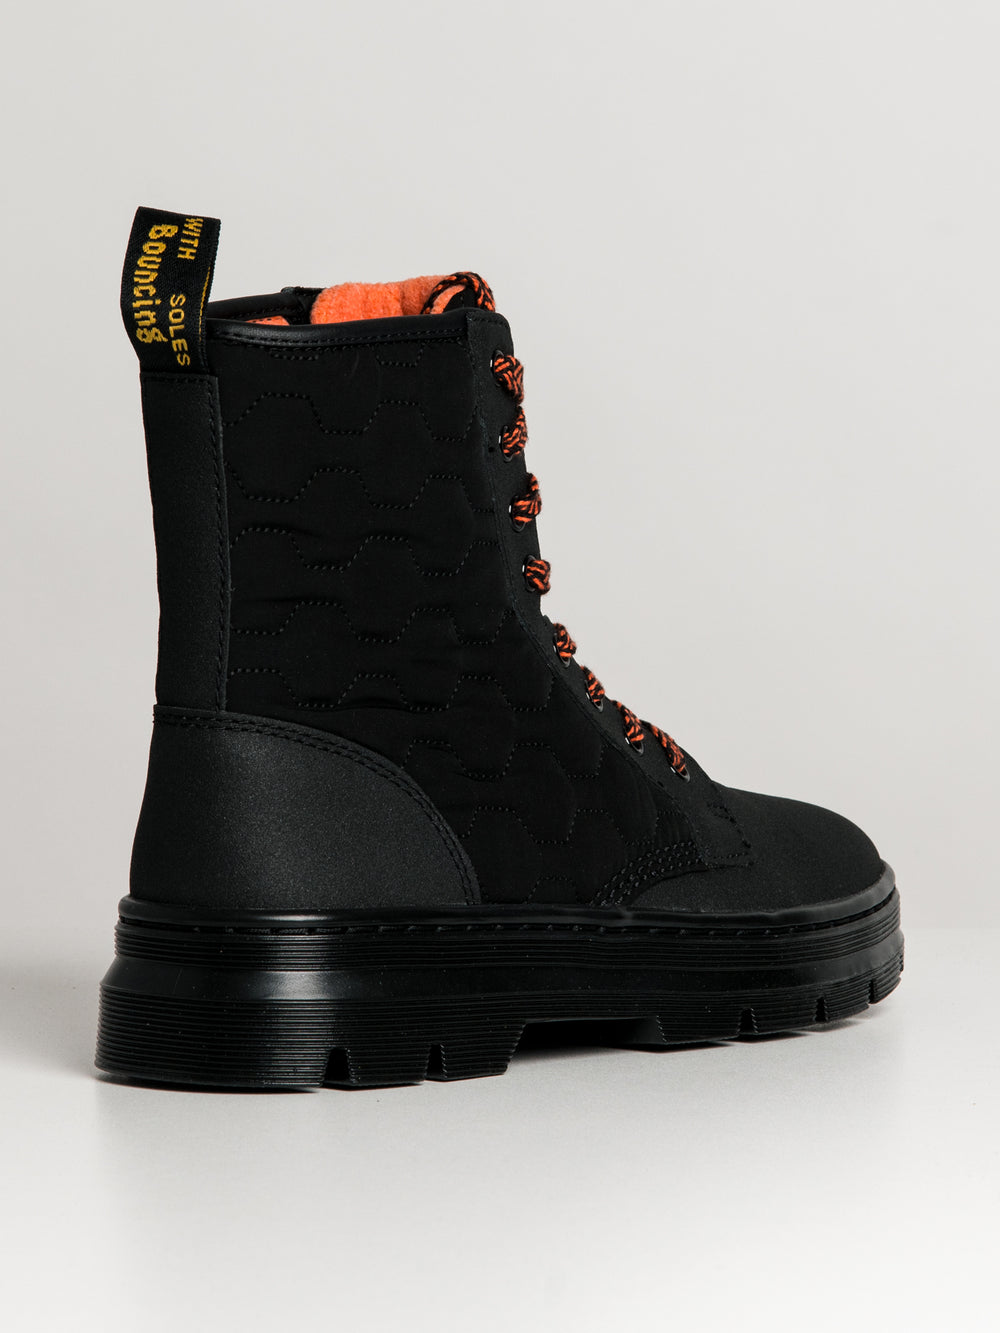 MENS DR MARTENS COMBS II DUAL ORG BOOT - CLEARANCE